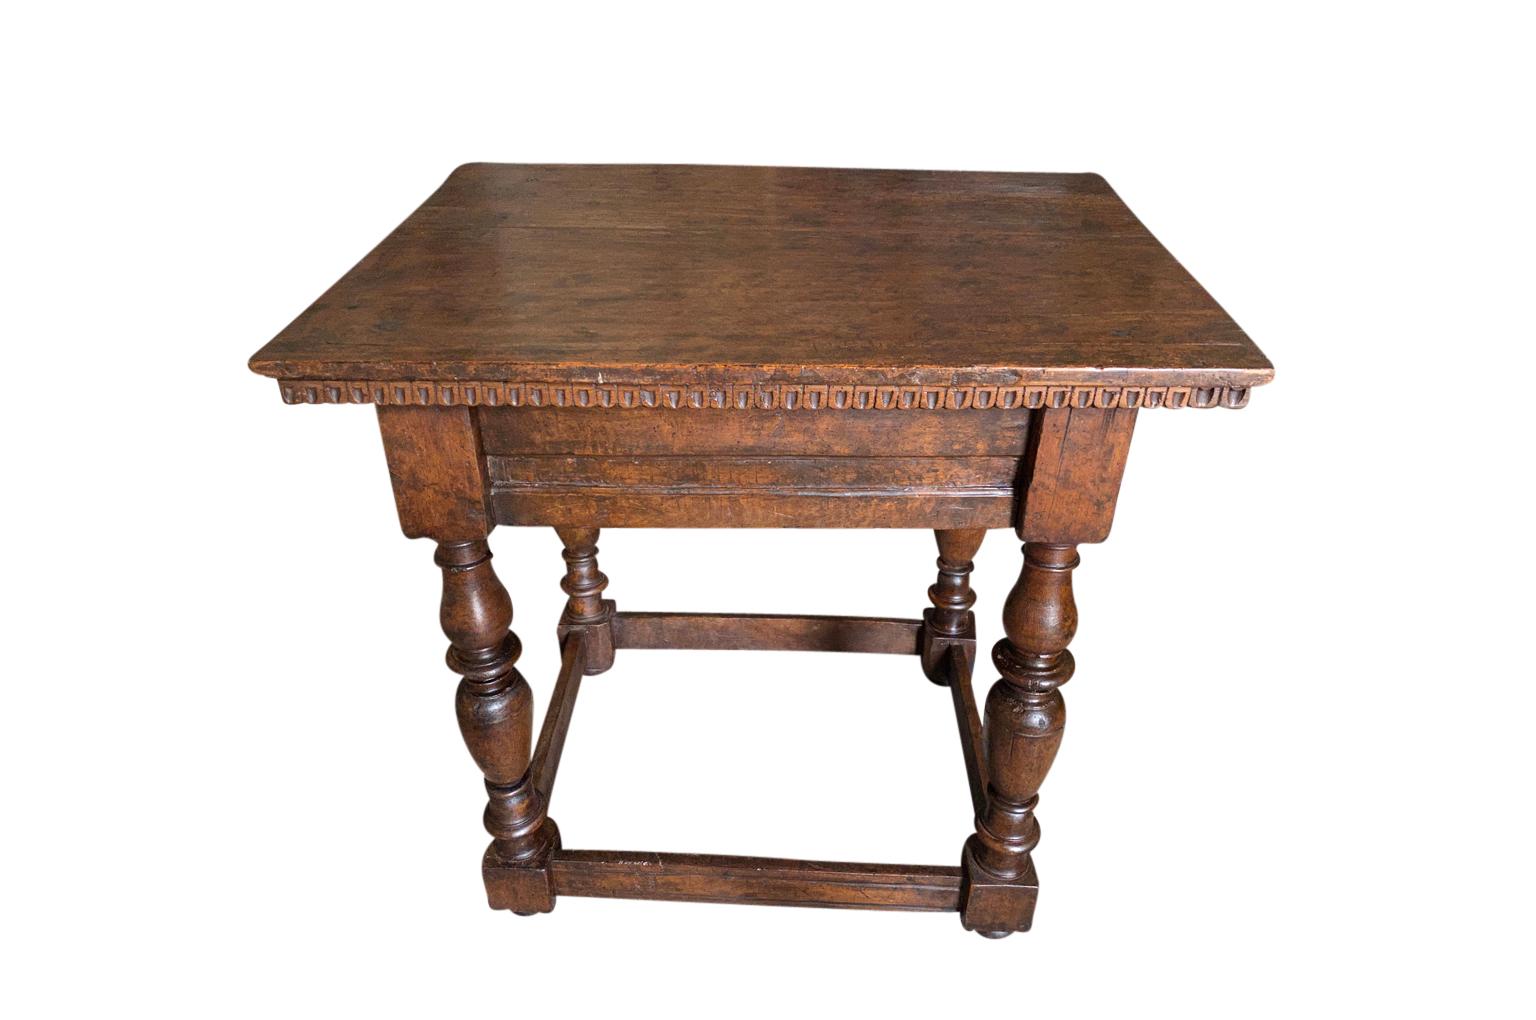 A very handsome 18th century side table from Tuscany. Beautifully constructed from stunning walnut with nicely turned legs and dentilated detail. Wonderful patina.